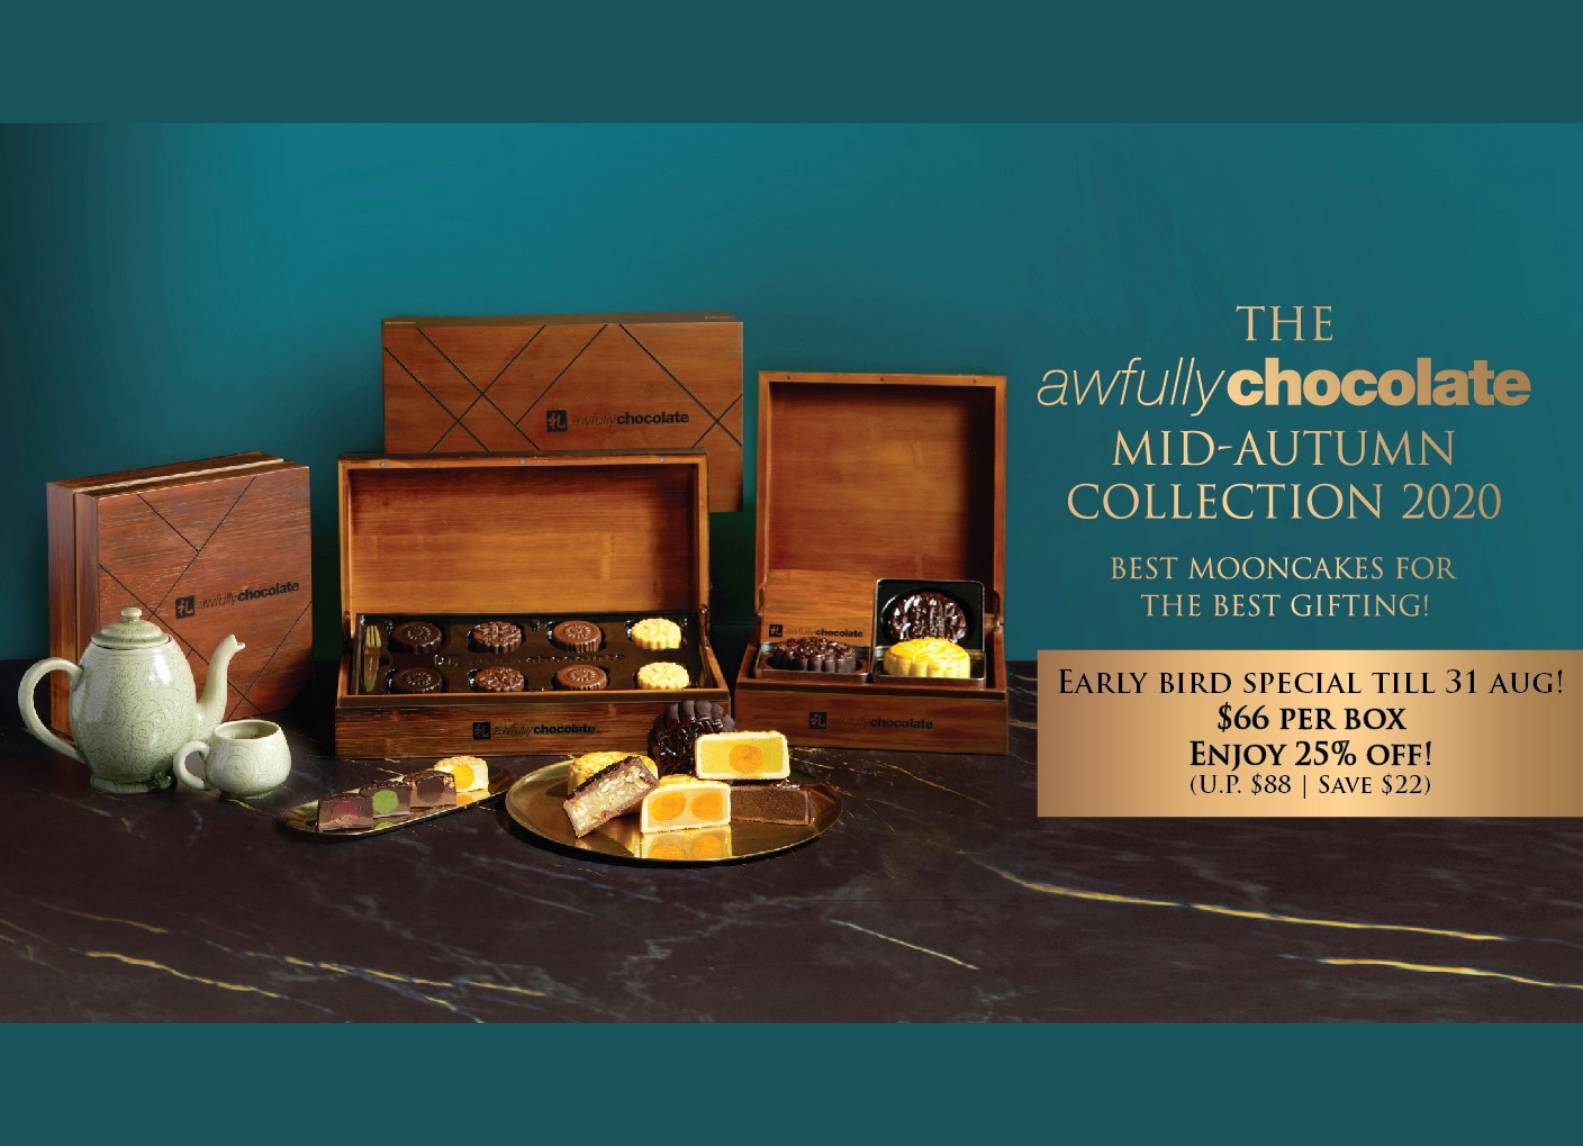 The Awfully Chocolate Mid-Autumn Collection 2020